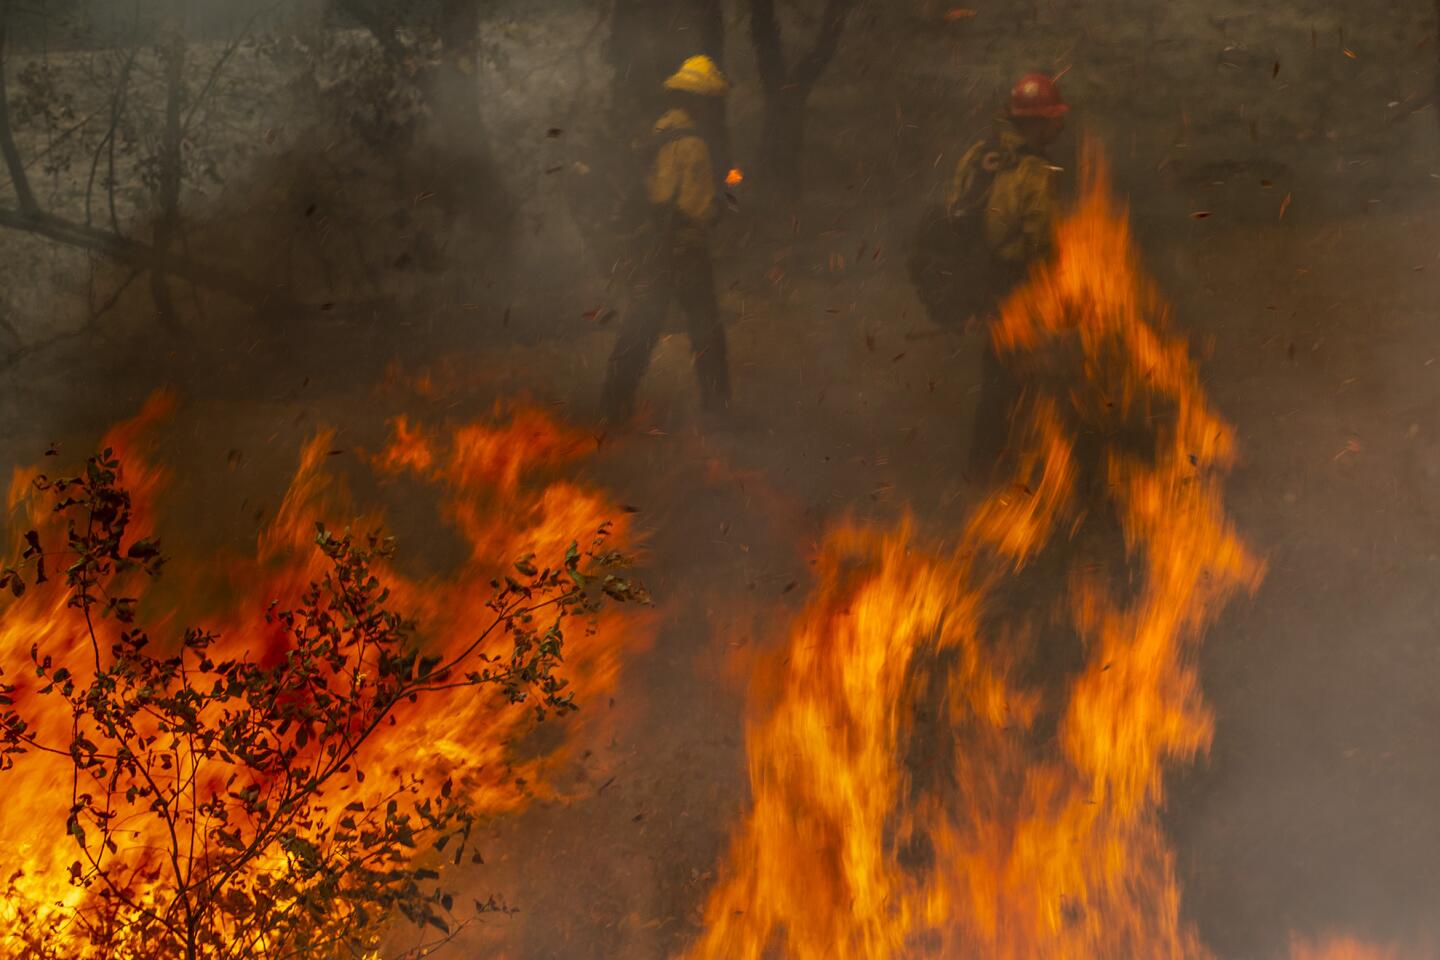 Firefighters are seen behind leaping flames.